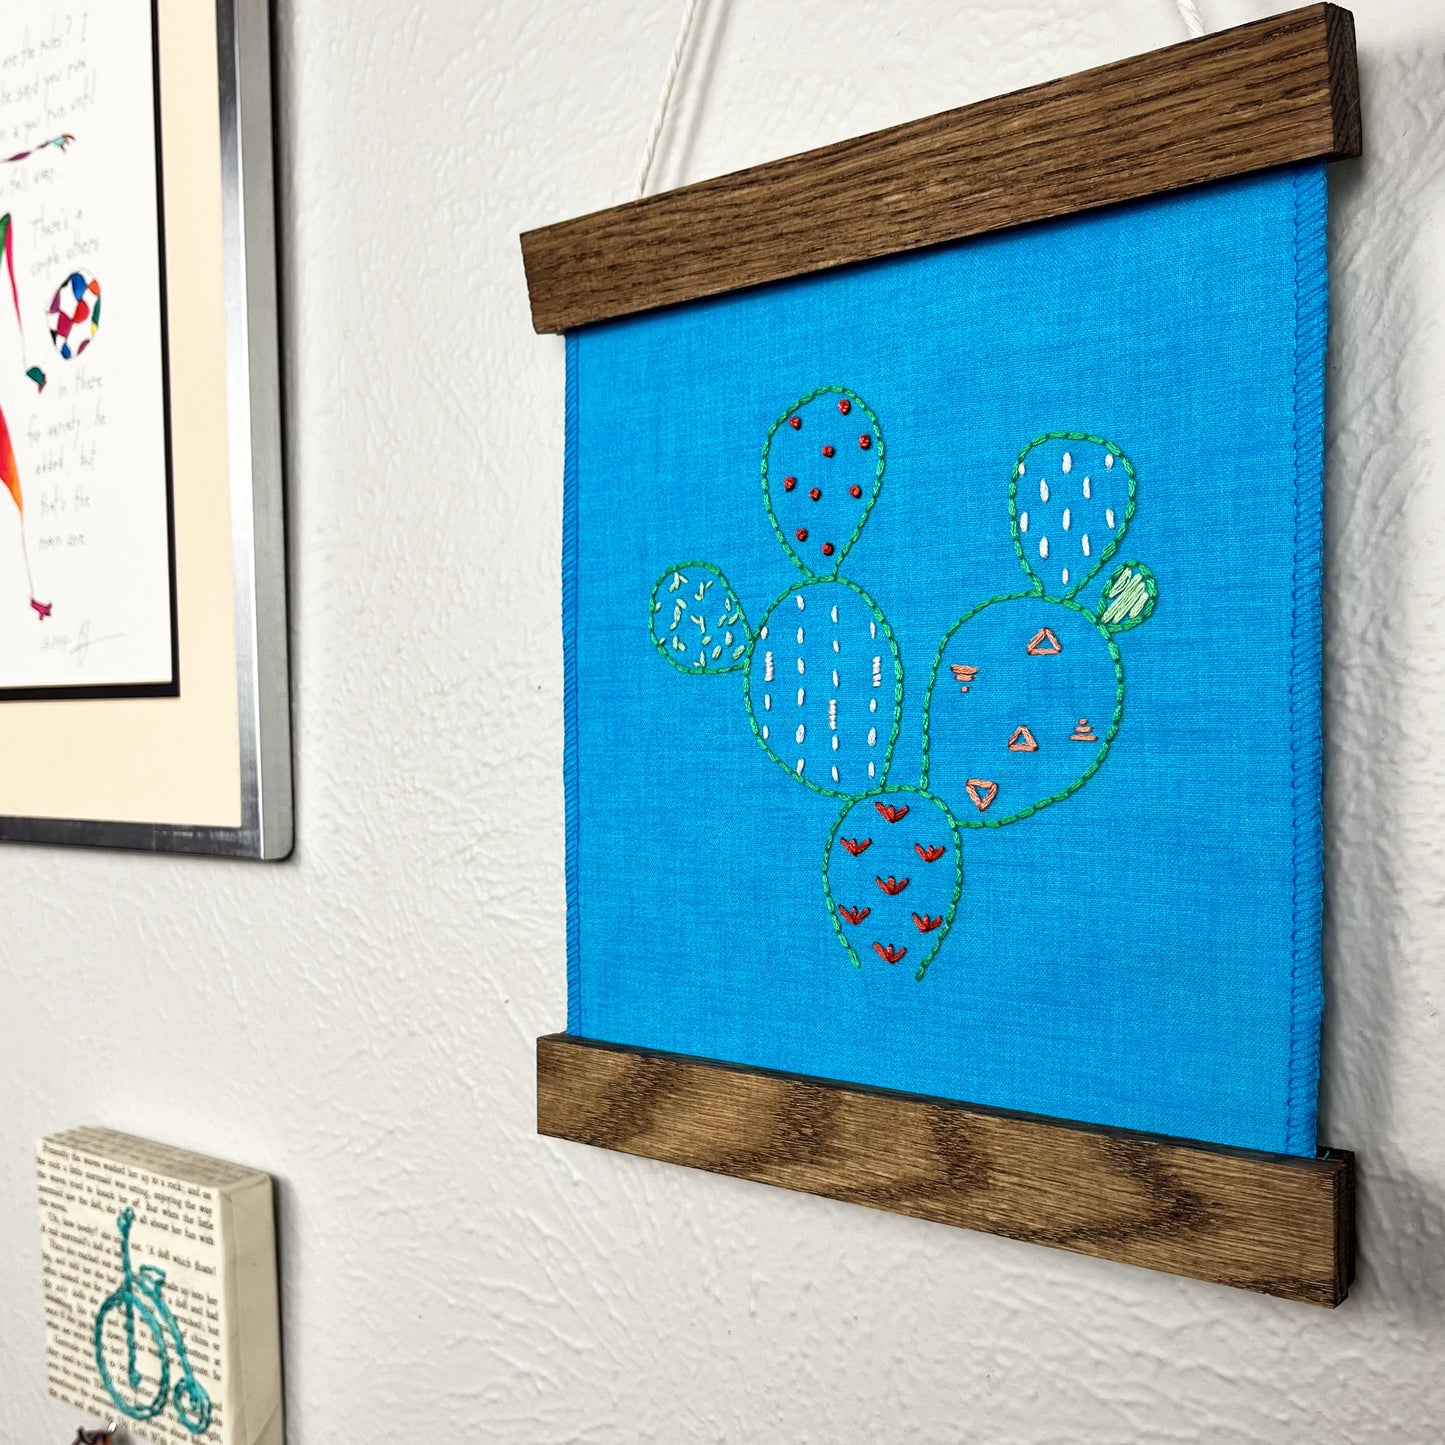 a small bright blue fabric wall hanging in a magnetic wood frame, hand embroidered with the outline of a prickly pear cactus in green, each pad filled with different stitches in different colors, hanging on a wall near other artwork